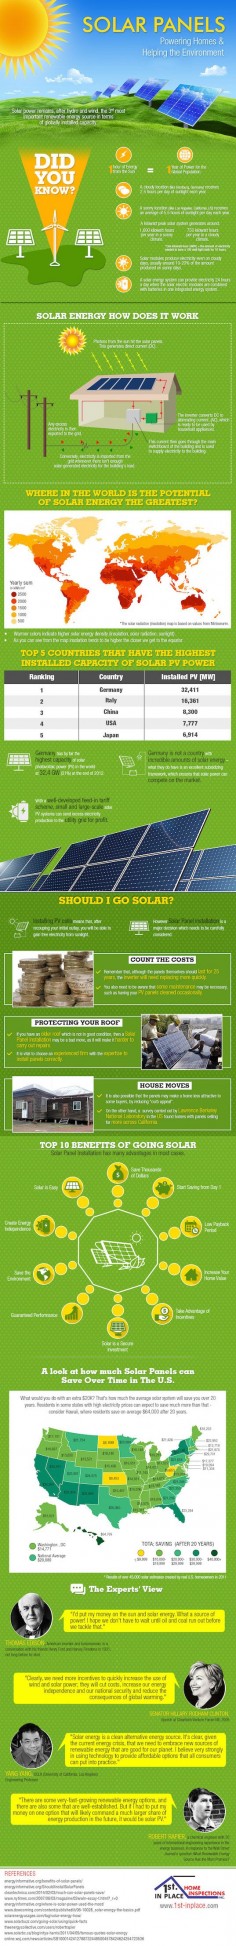 How solar panels work, and the benefits of going solar. #Infographic